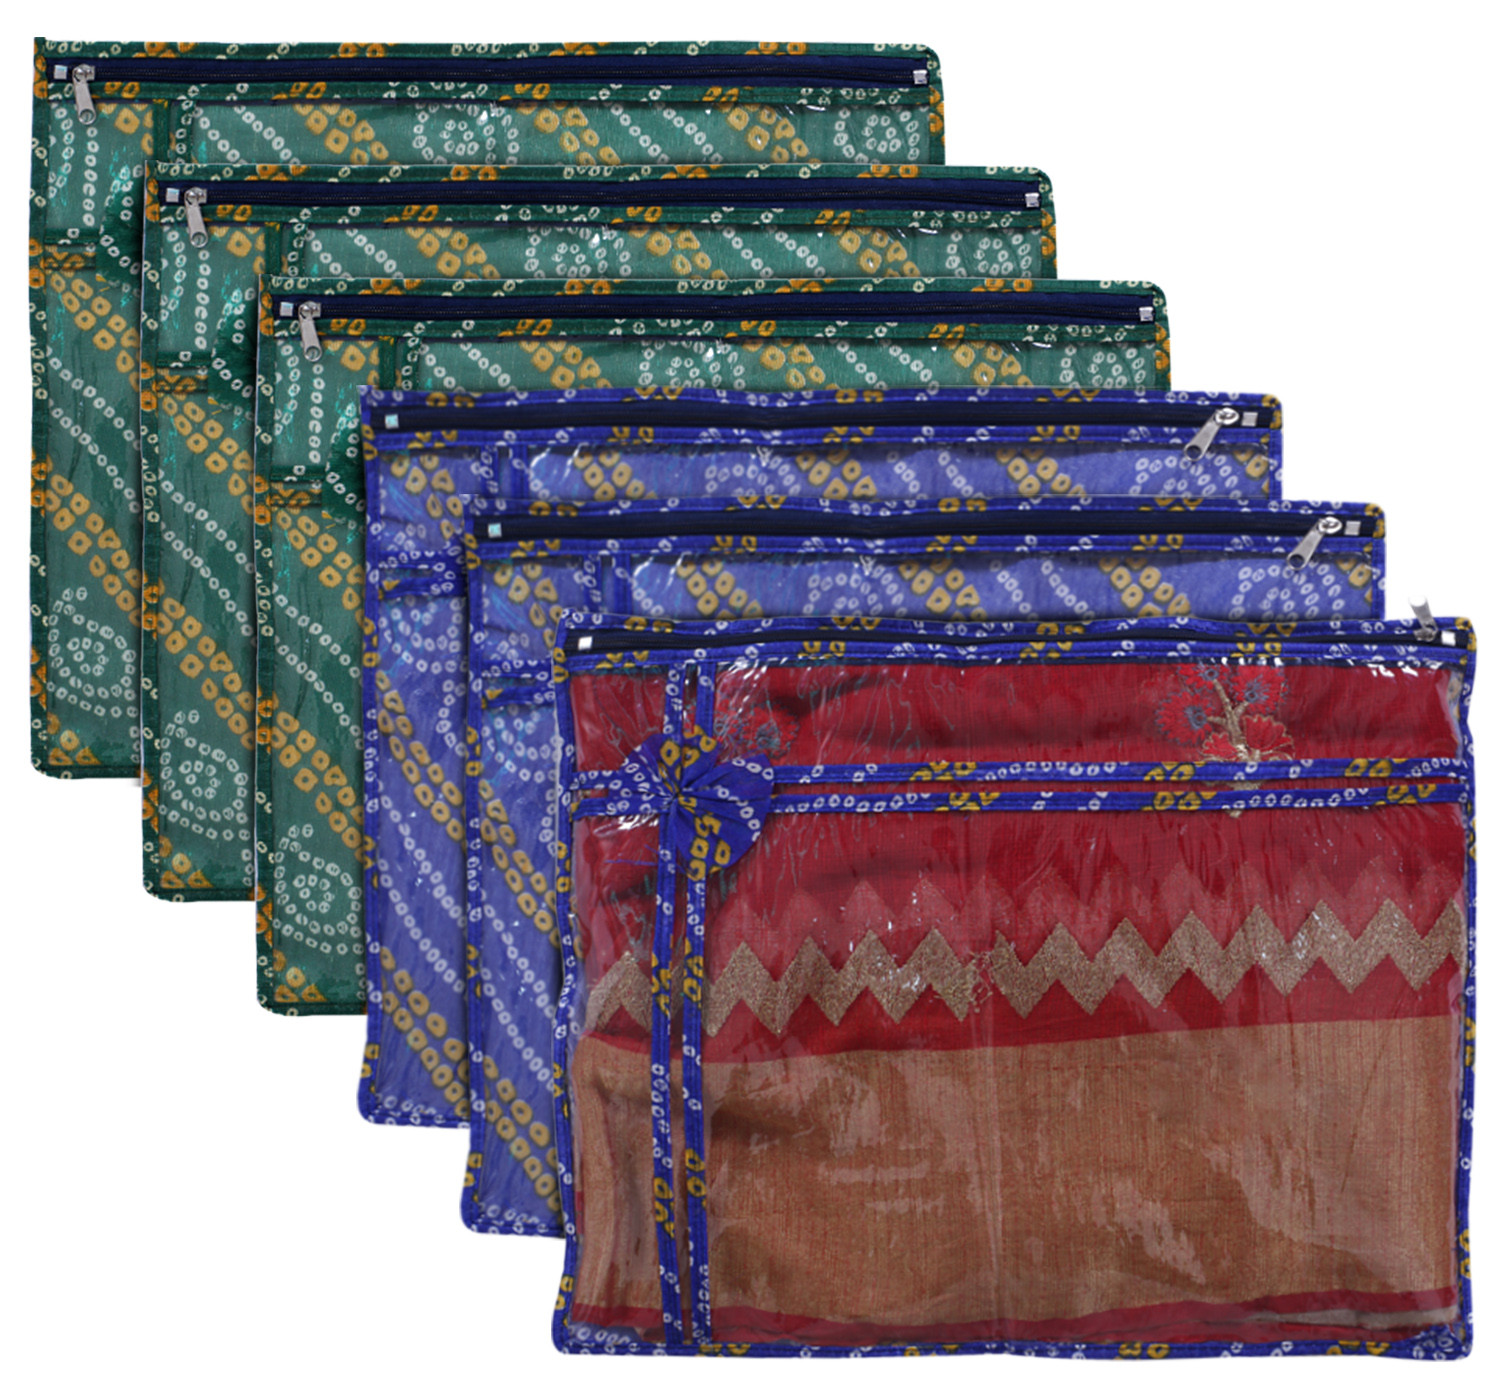 Kuber Industries Bandhani Print PVC Foldable Single Saree Cover|Clothes Storage For Saree, Lehenga, Suit With Transparent Pack of 6 (Green & Blue)